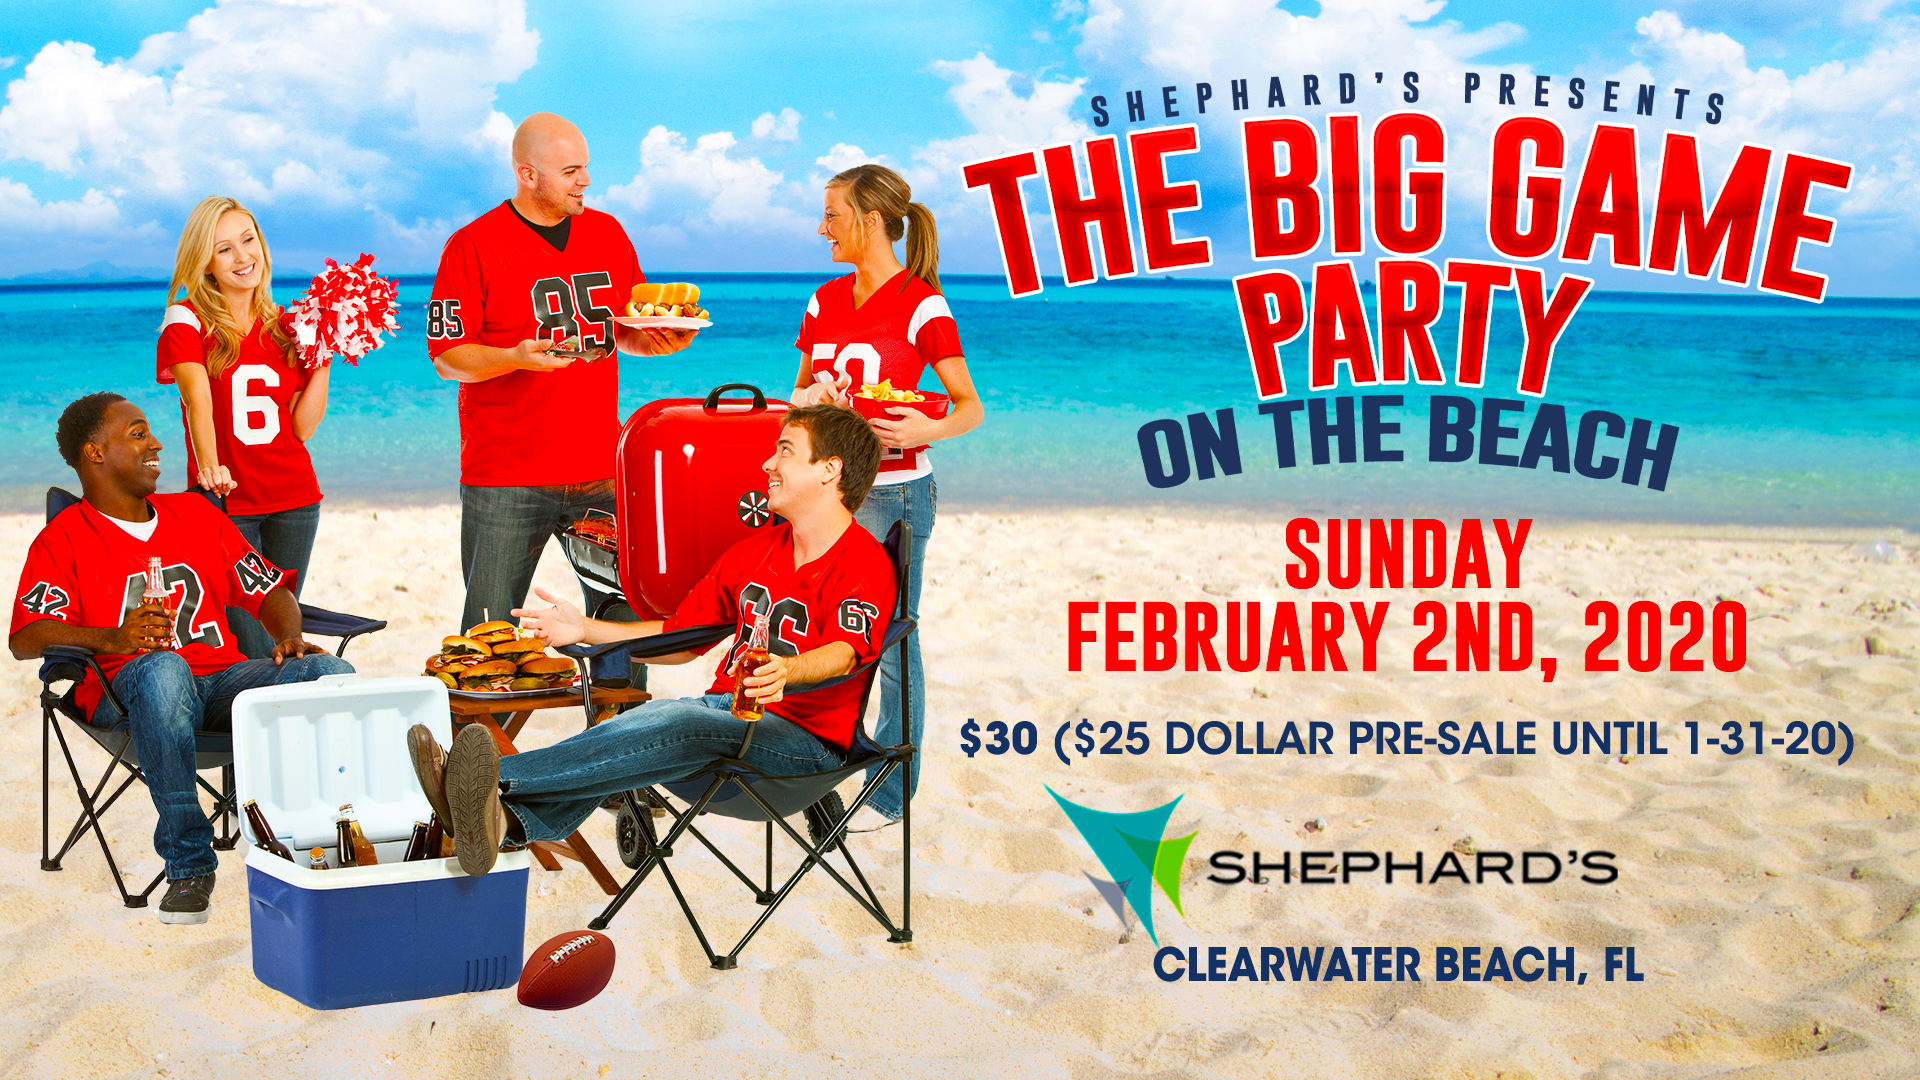 Big Game Tailgate Party on the Beach